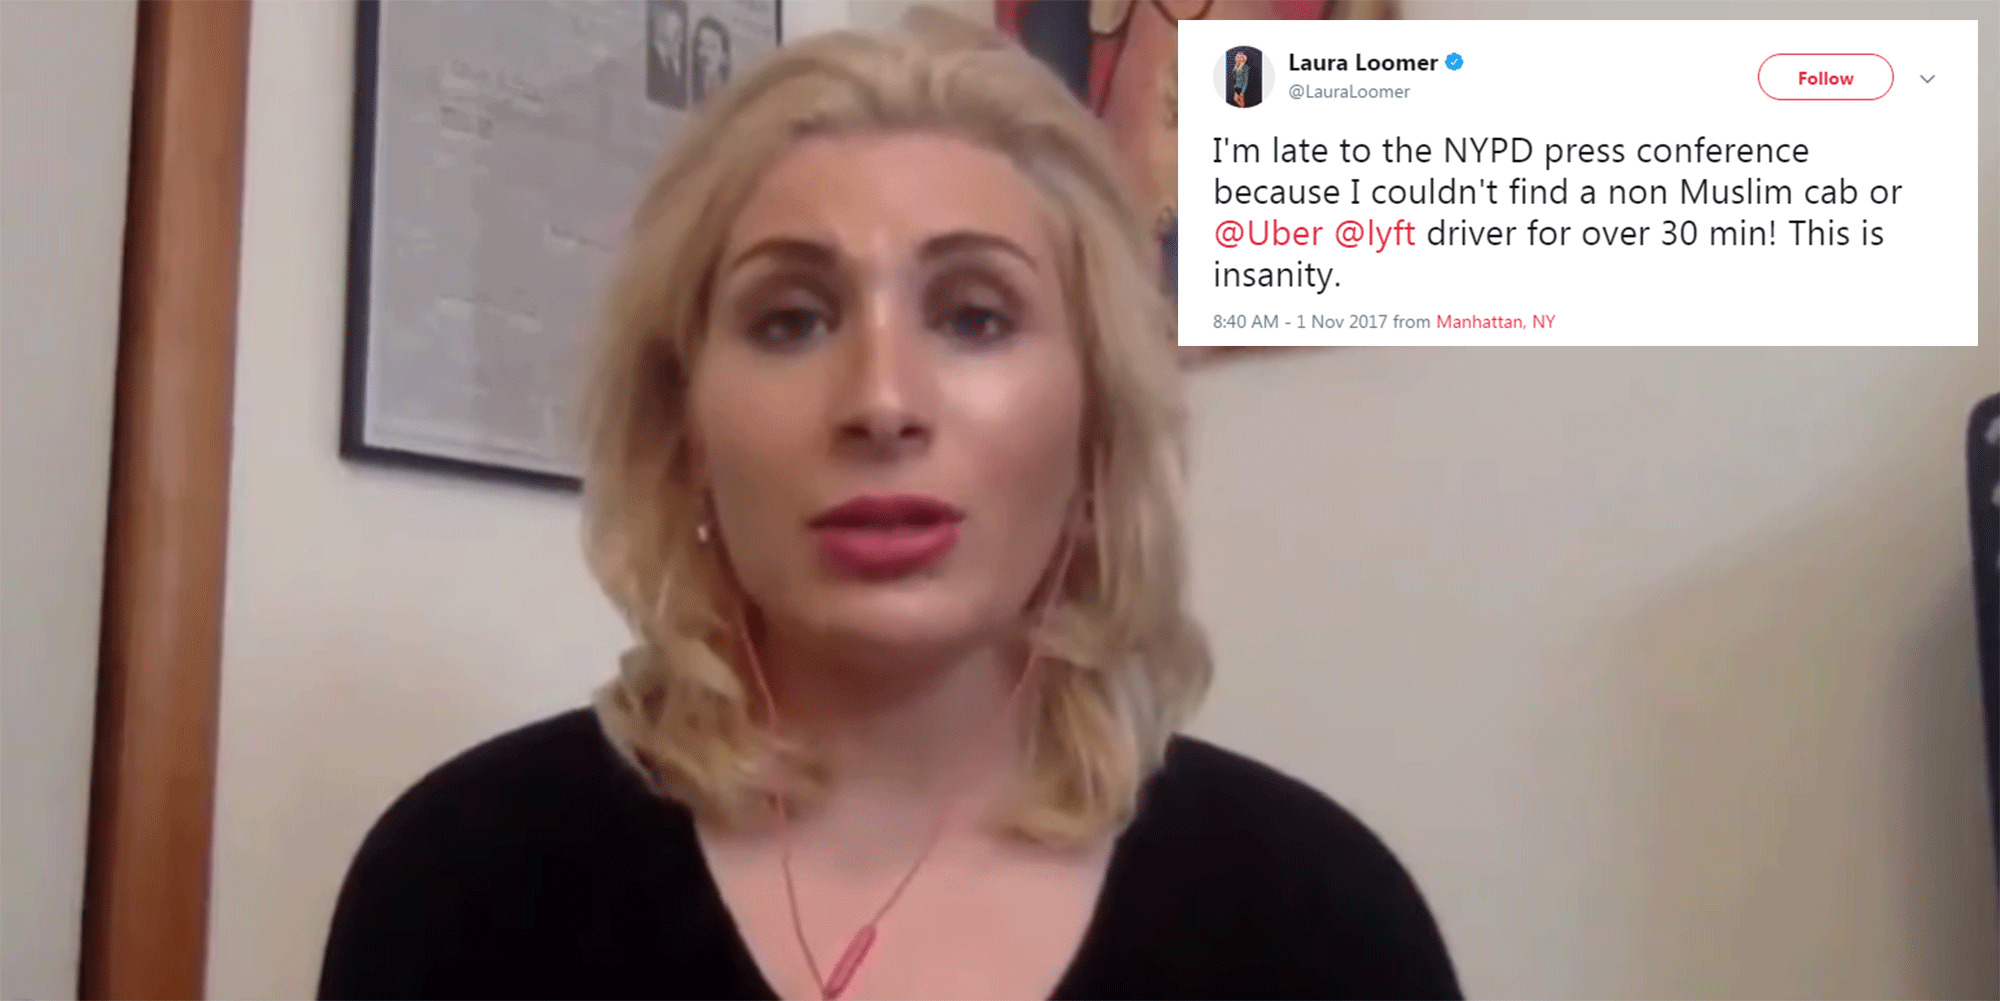 Uber and Lyft ban far-right activist after anti-Muslim tweets